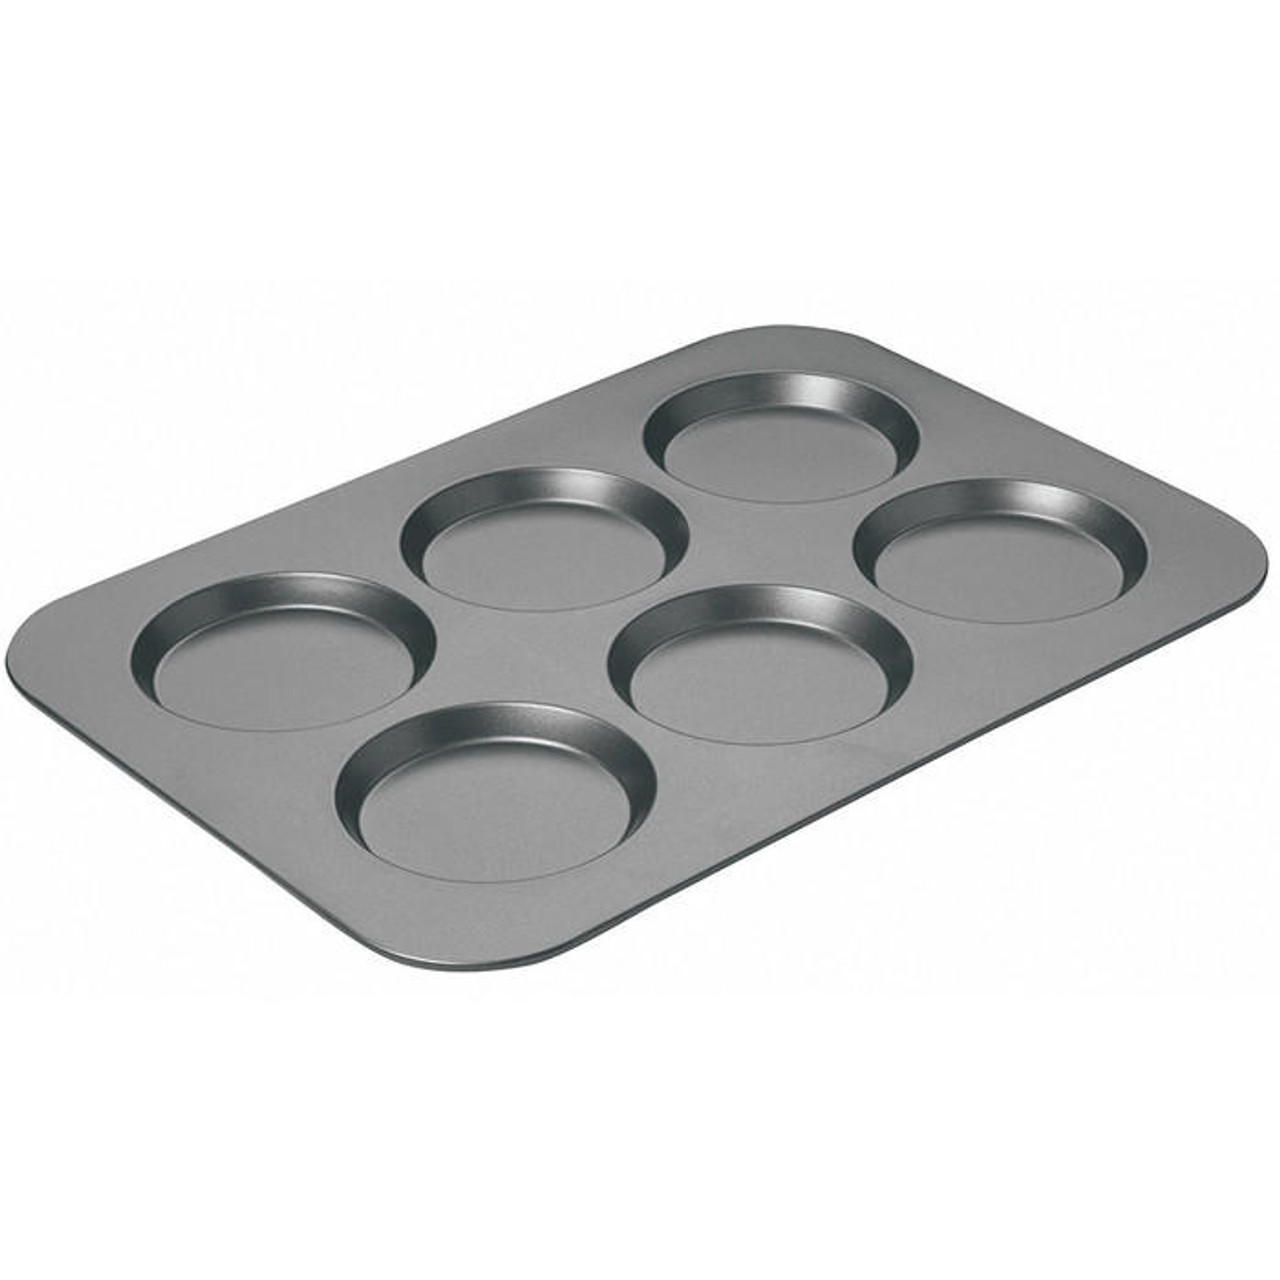 Mrs. Anderson's Baking Silicone 6-Cup Muffin Top Pan